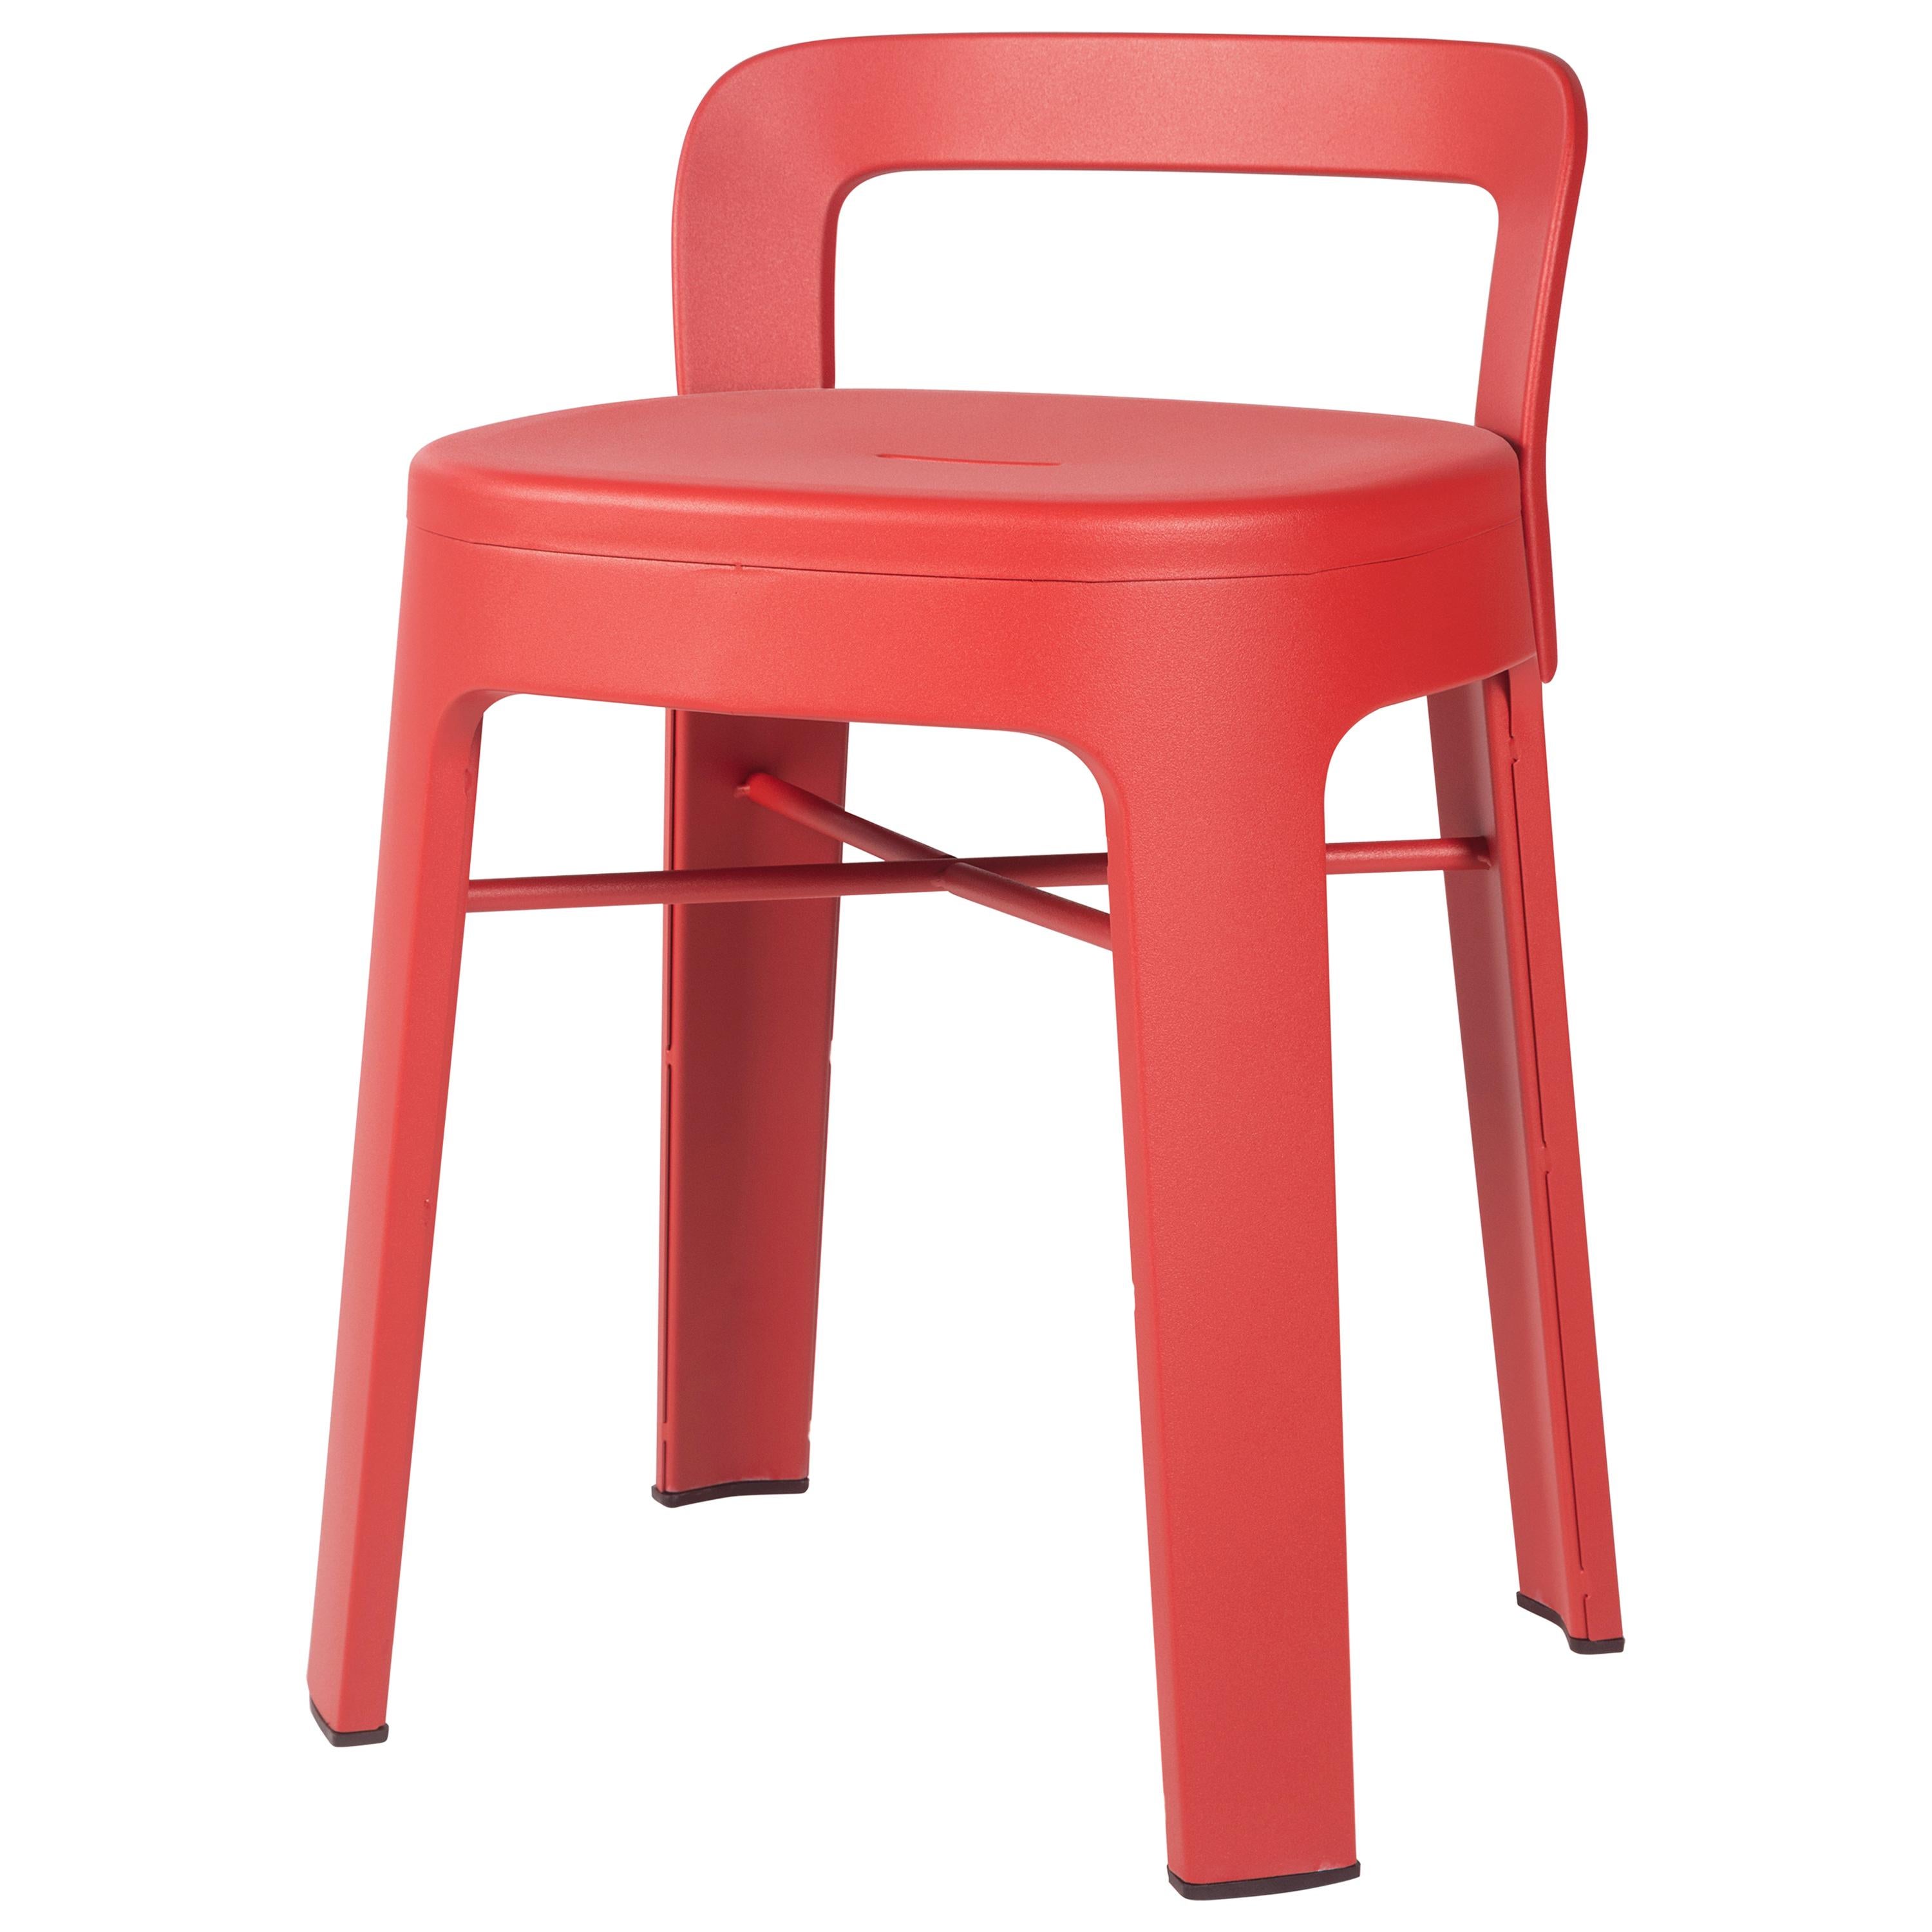 Ombra Low Stool with Backrest, Red by Emiliana Design Studio For Sale